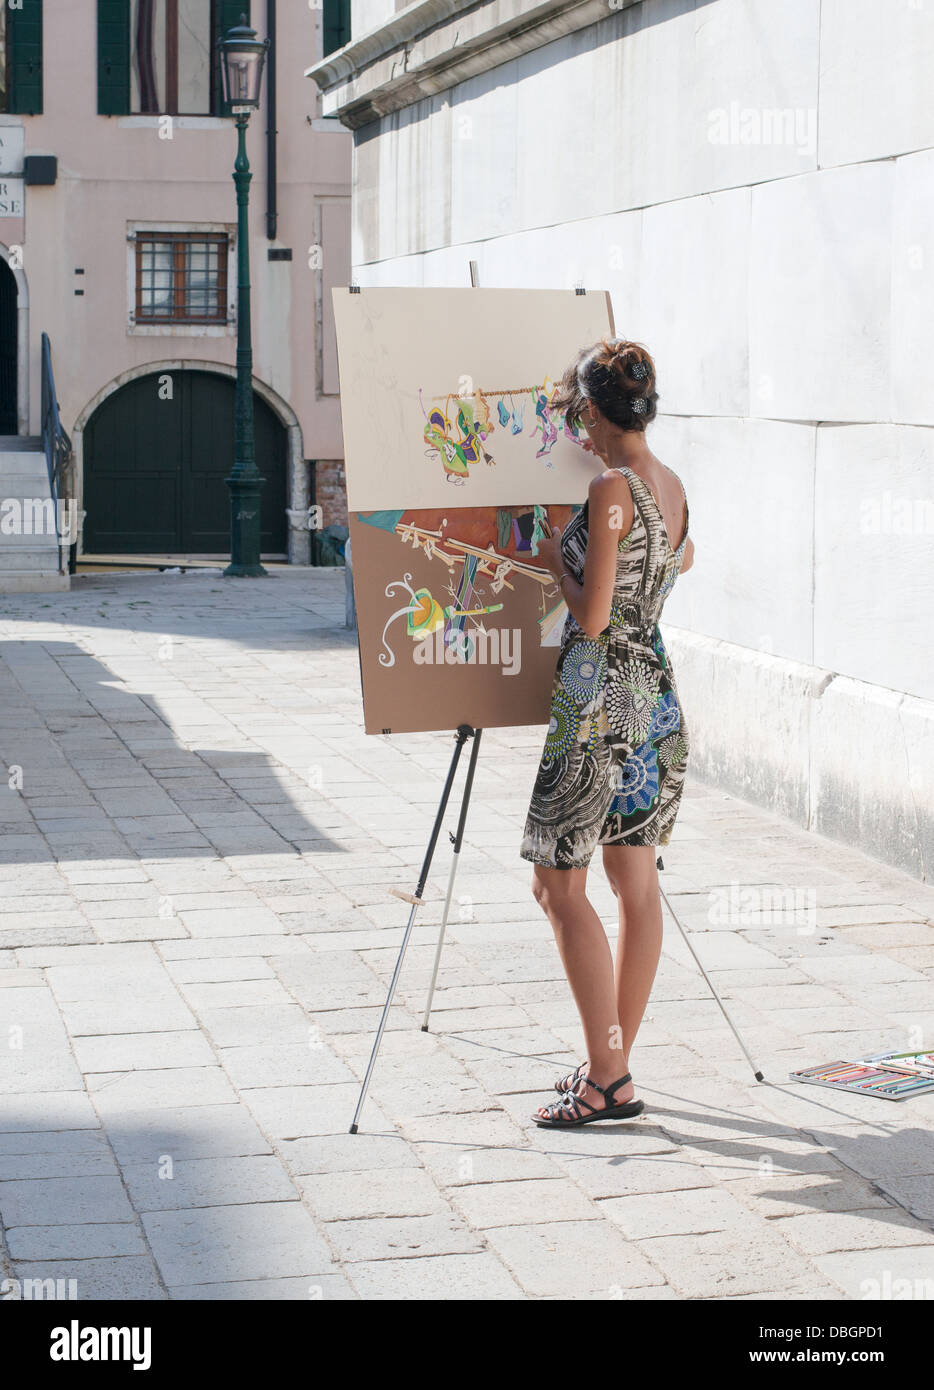 Young woman painting with an artist's easel in Venice, Italy Stock Photo